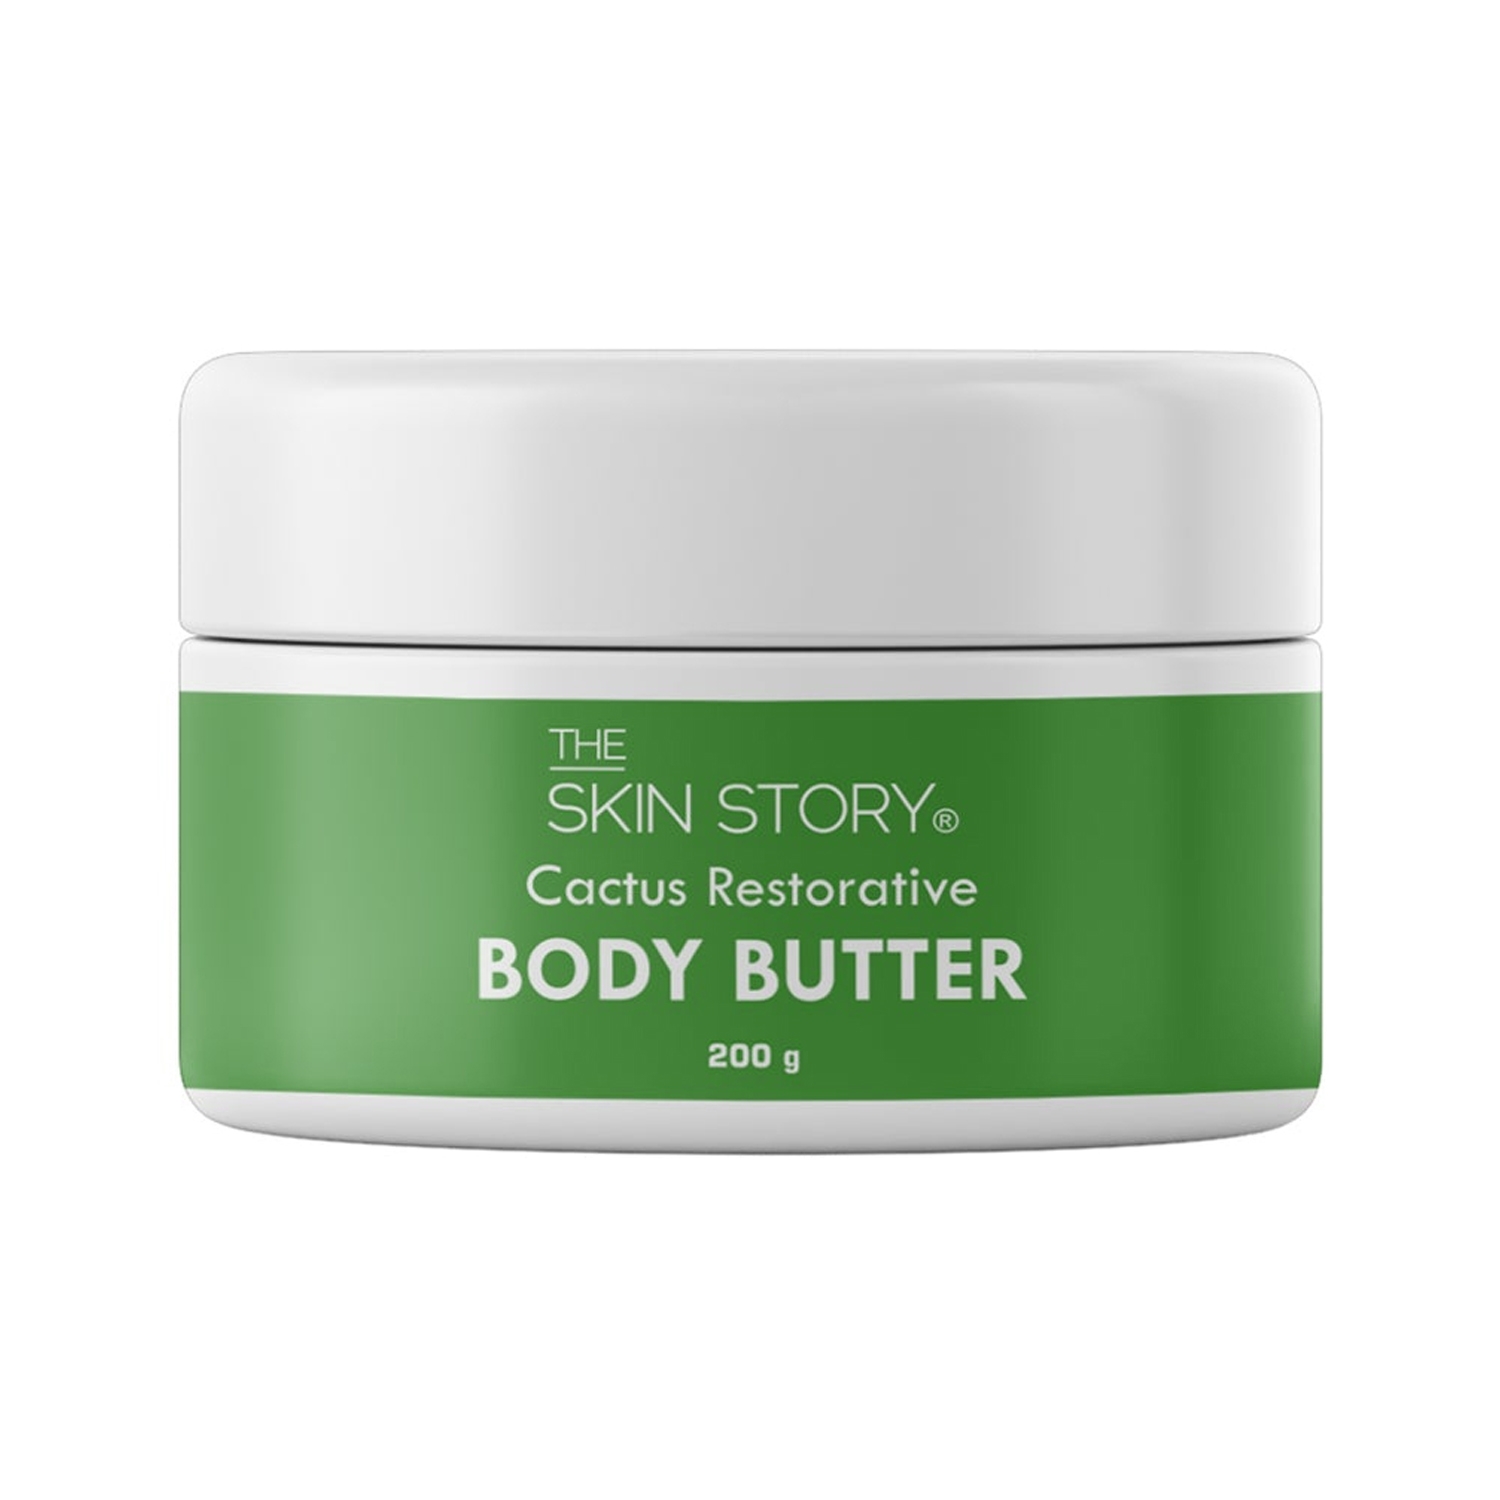 The Skin Story | The Skin Story Cactus Restorative Body Butter (200g)